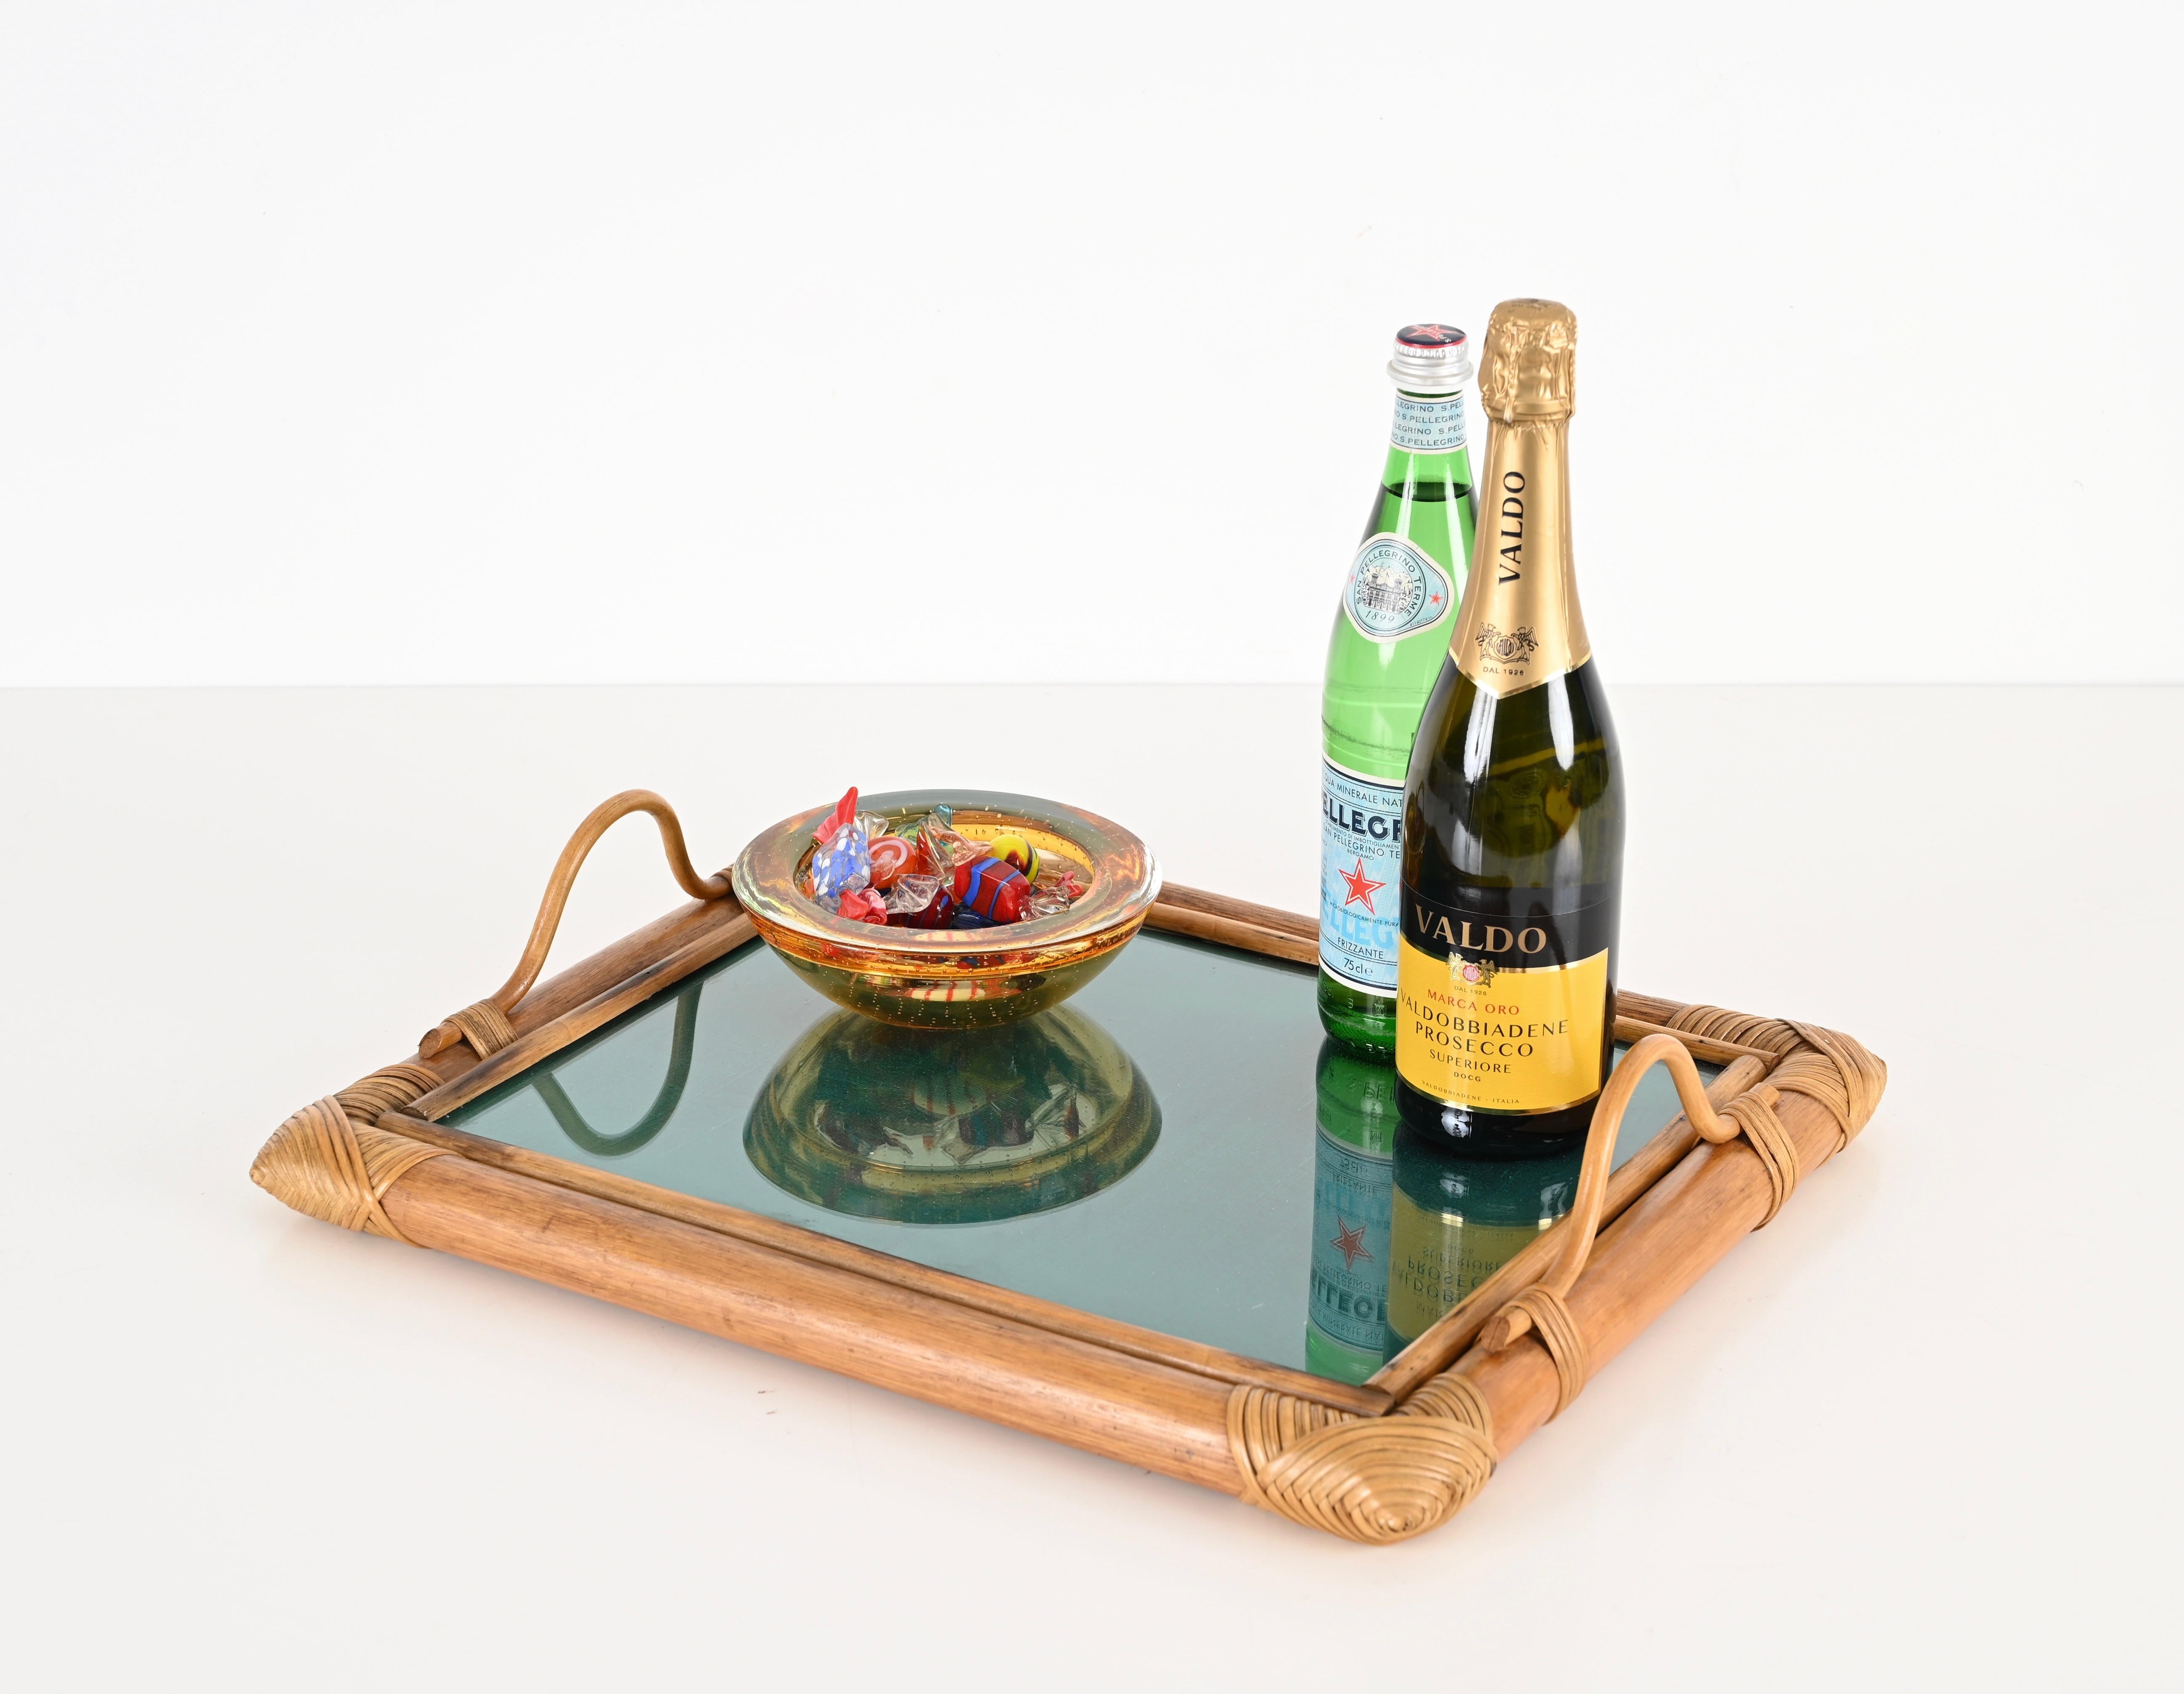 Fantastic rectangular serving tray fully made in bamboo canes, curved rattan and hand-woven wicker. This lovely French Riviera style tray was made in Italy during the 1970s.

The tray has a rectangular frame in a sturdy bamboo enriched on the